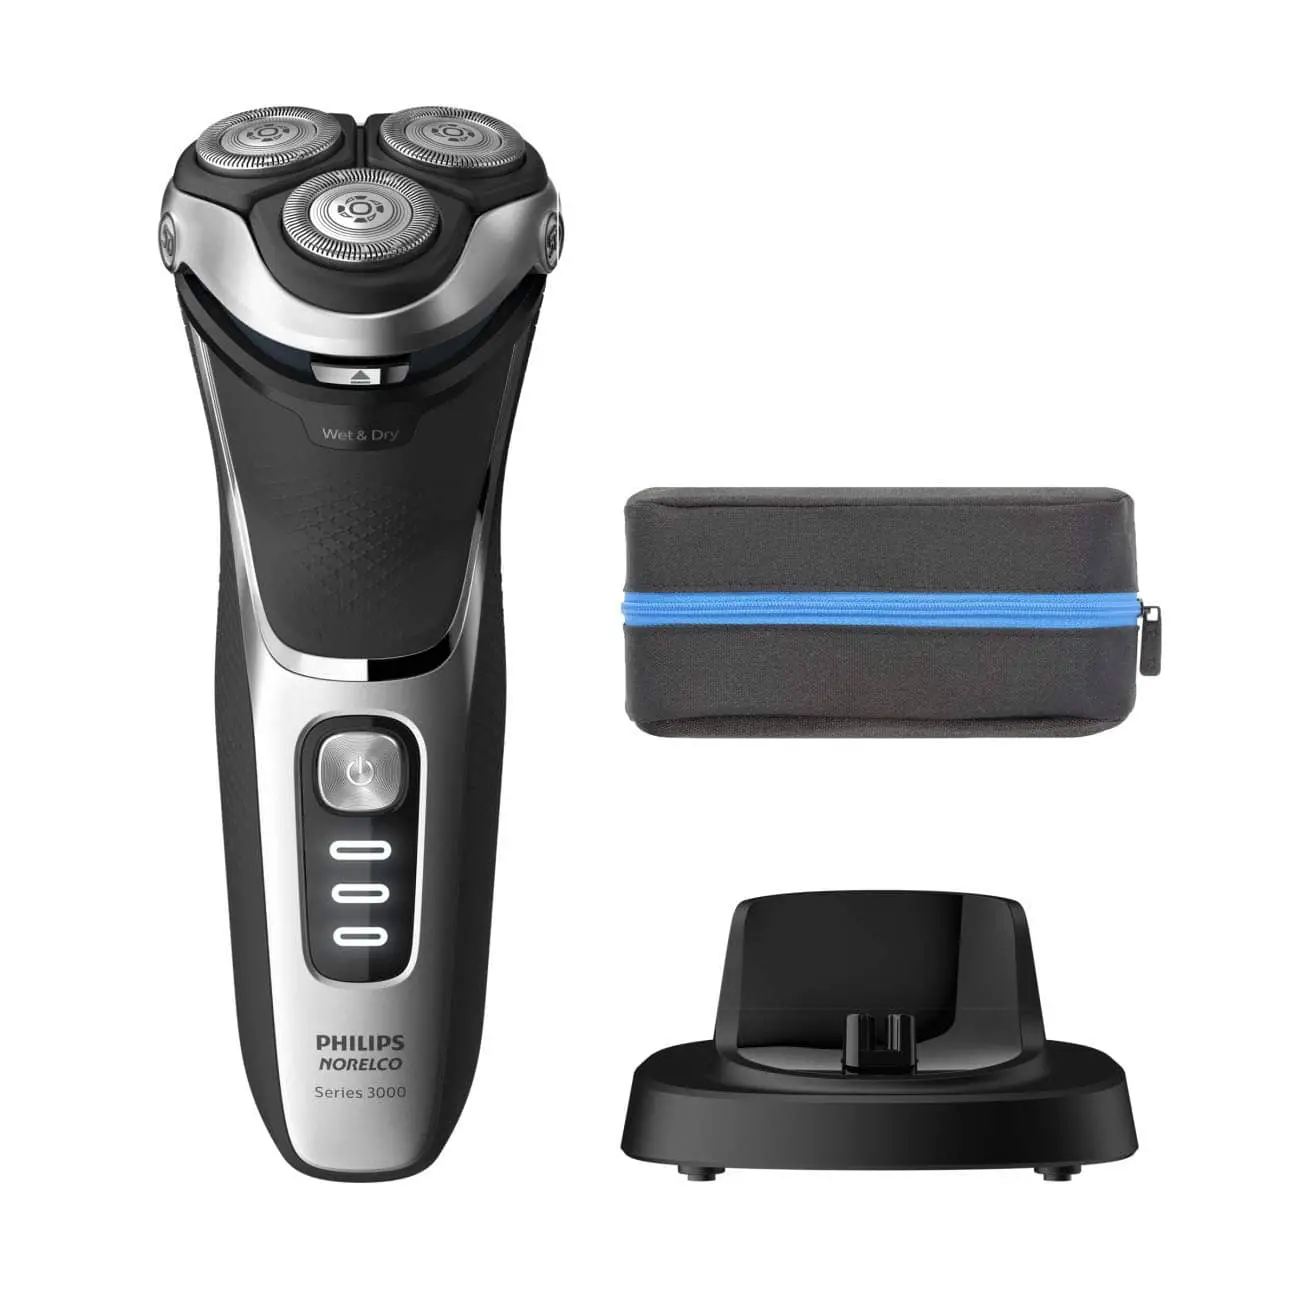 Philips Norelco 3800 Best head shaver for buzz cut